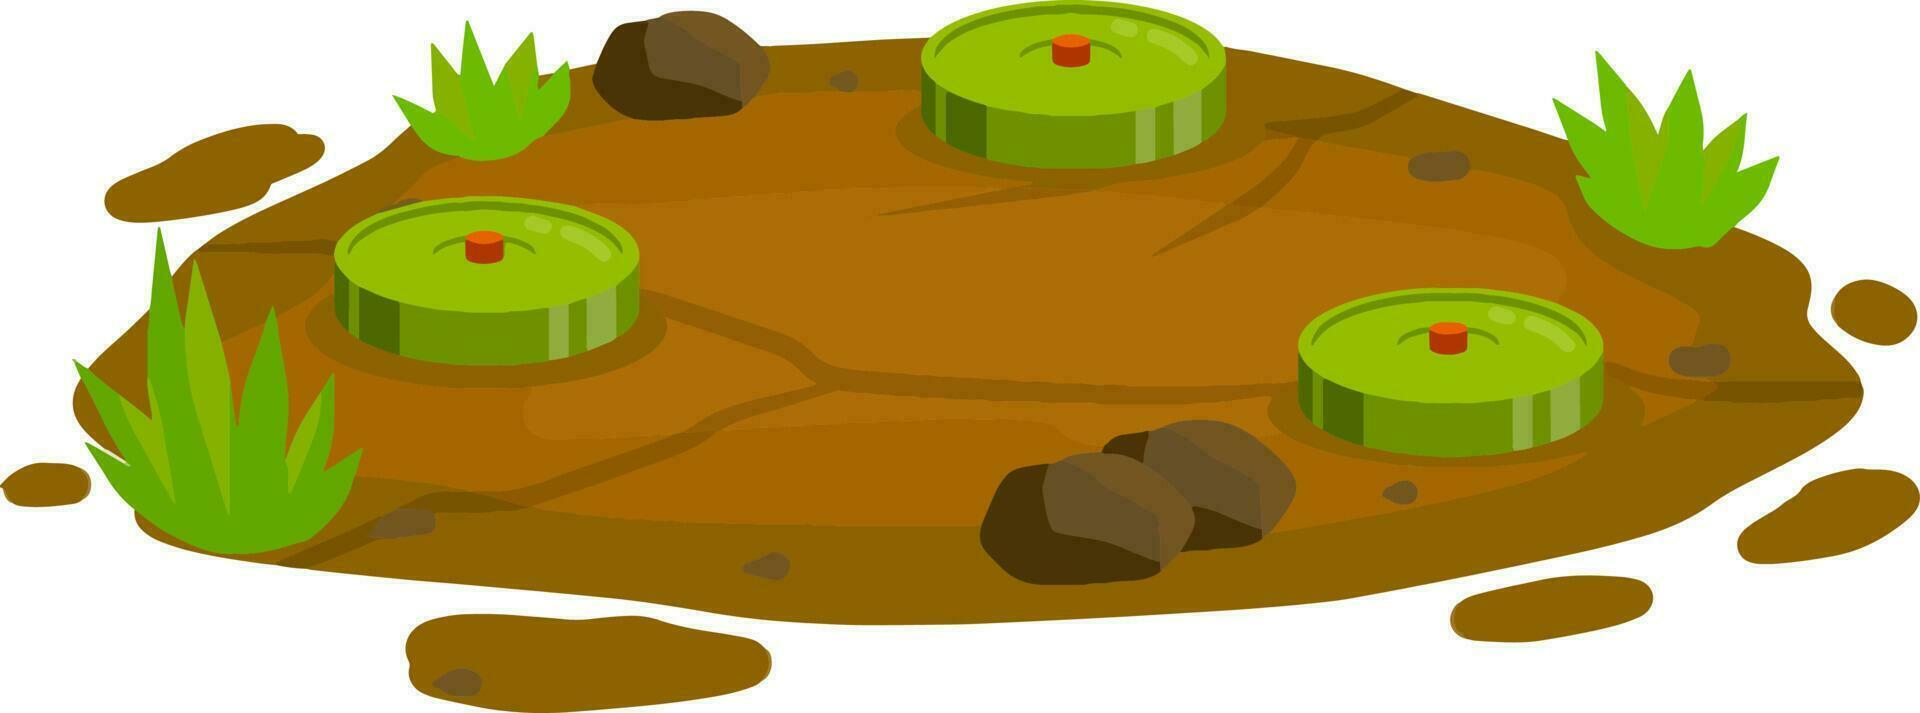 Minefield. Set of mines on ground. Rocks and grass. Explosive element of war. Cartoon flat illustration. Green lawn with bombs. Modern warfare landscape vector